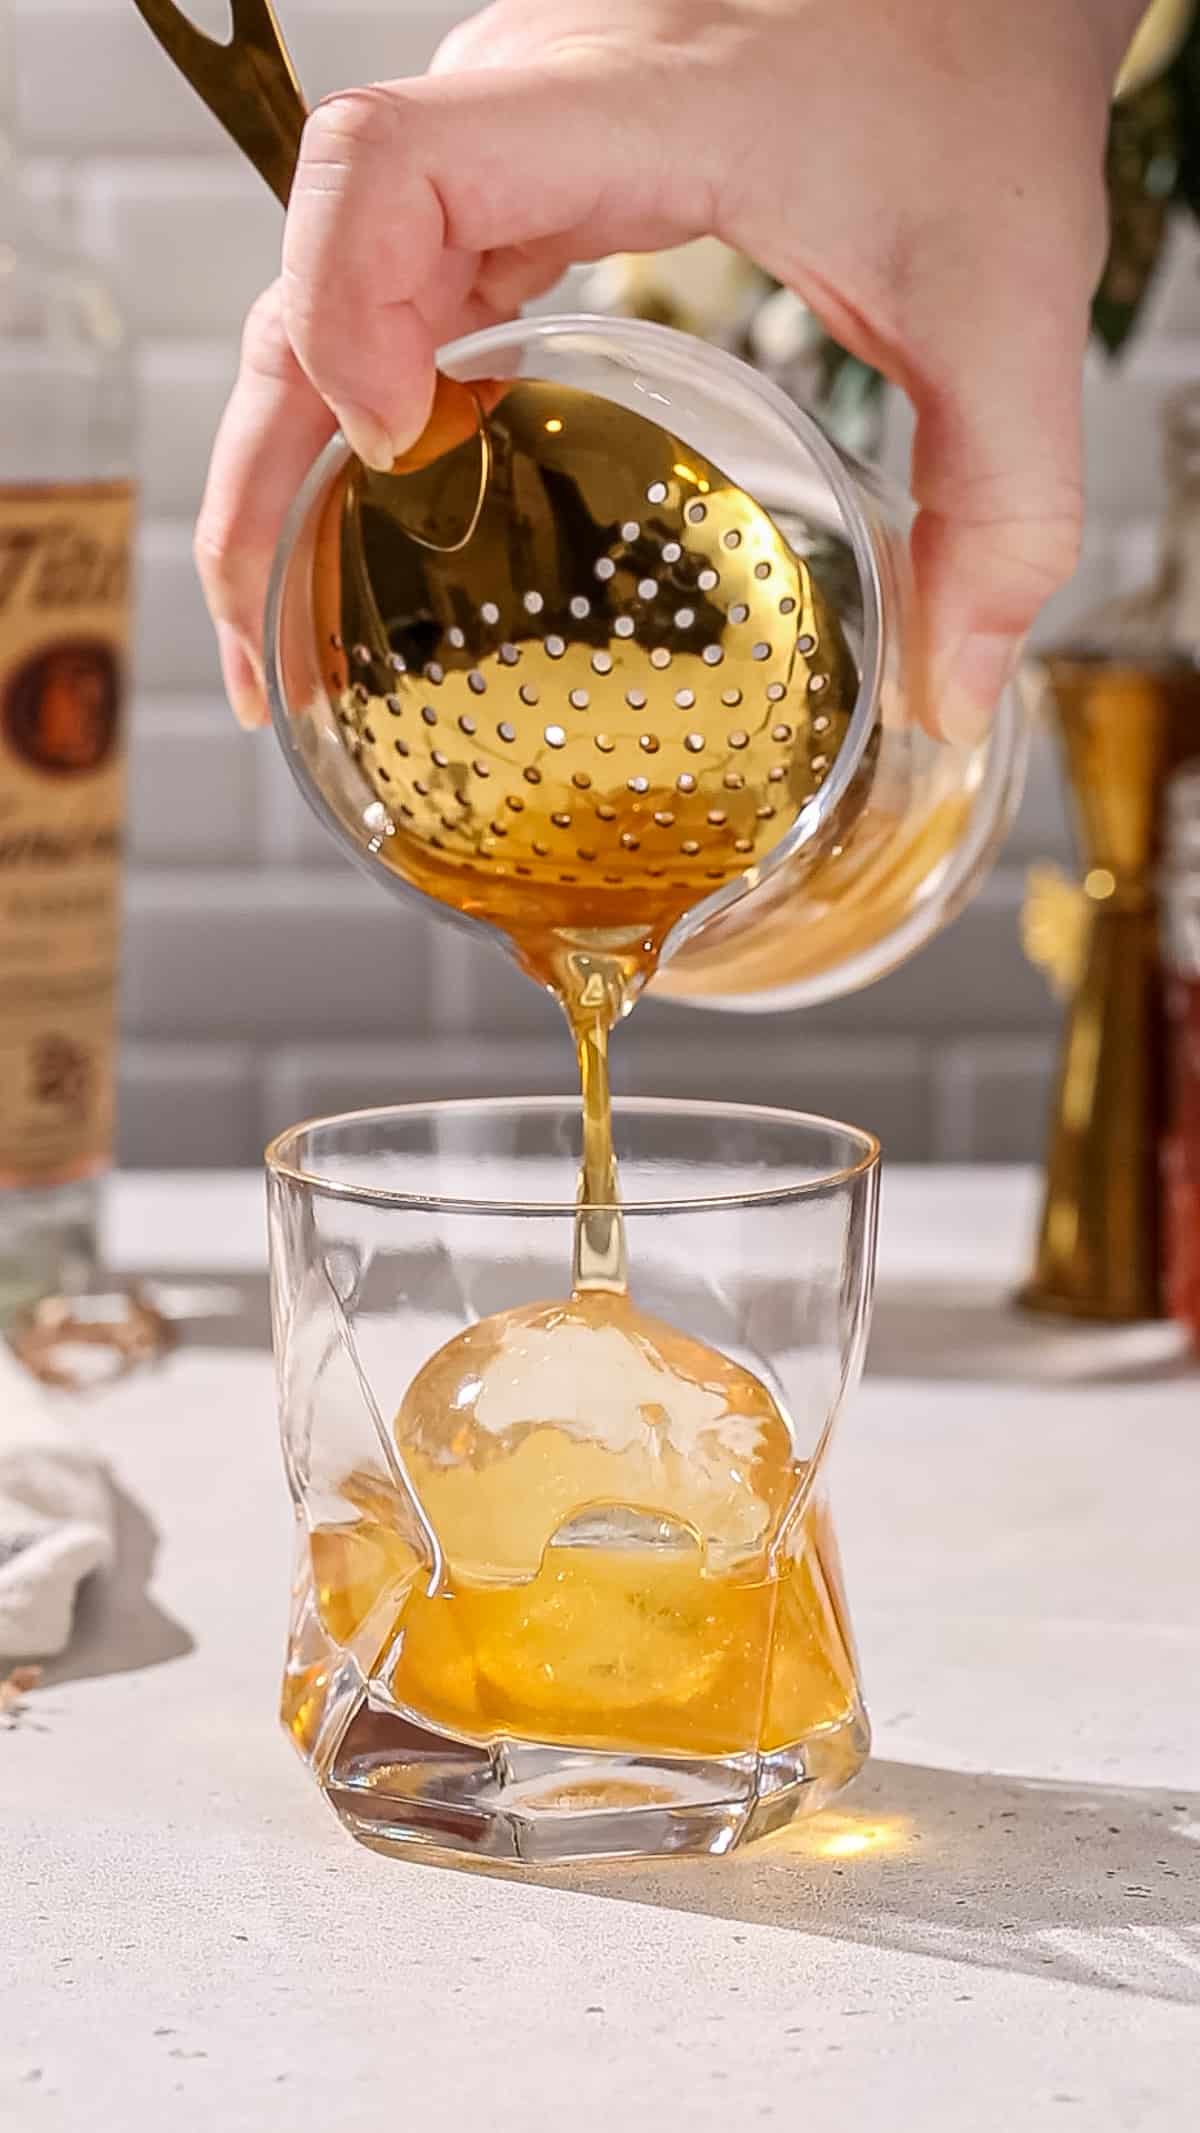 Hand using a mixing glass and a Julep strainer to strain an amber colored cocktail over top of the ice sphere.